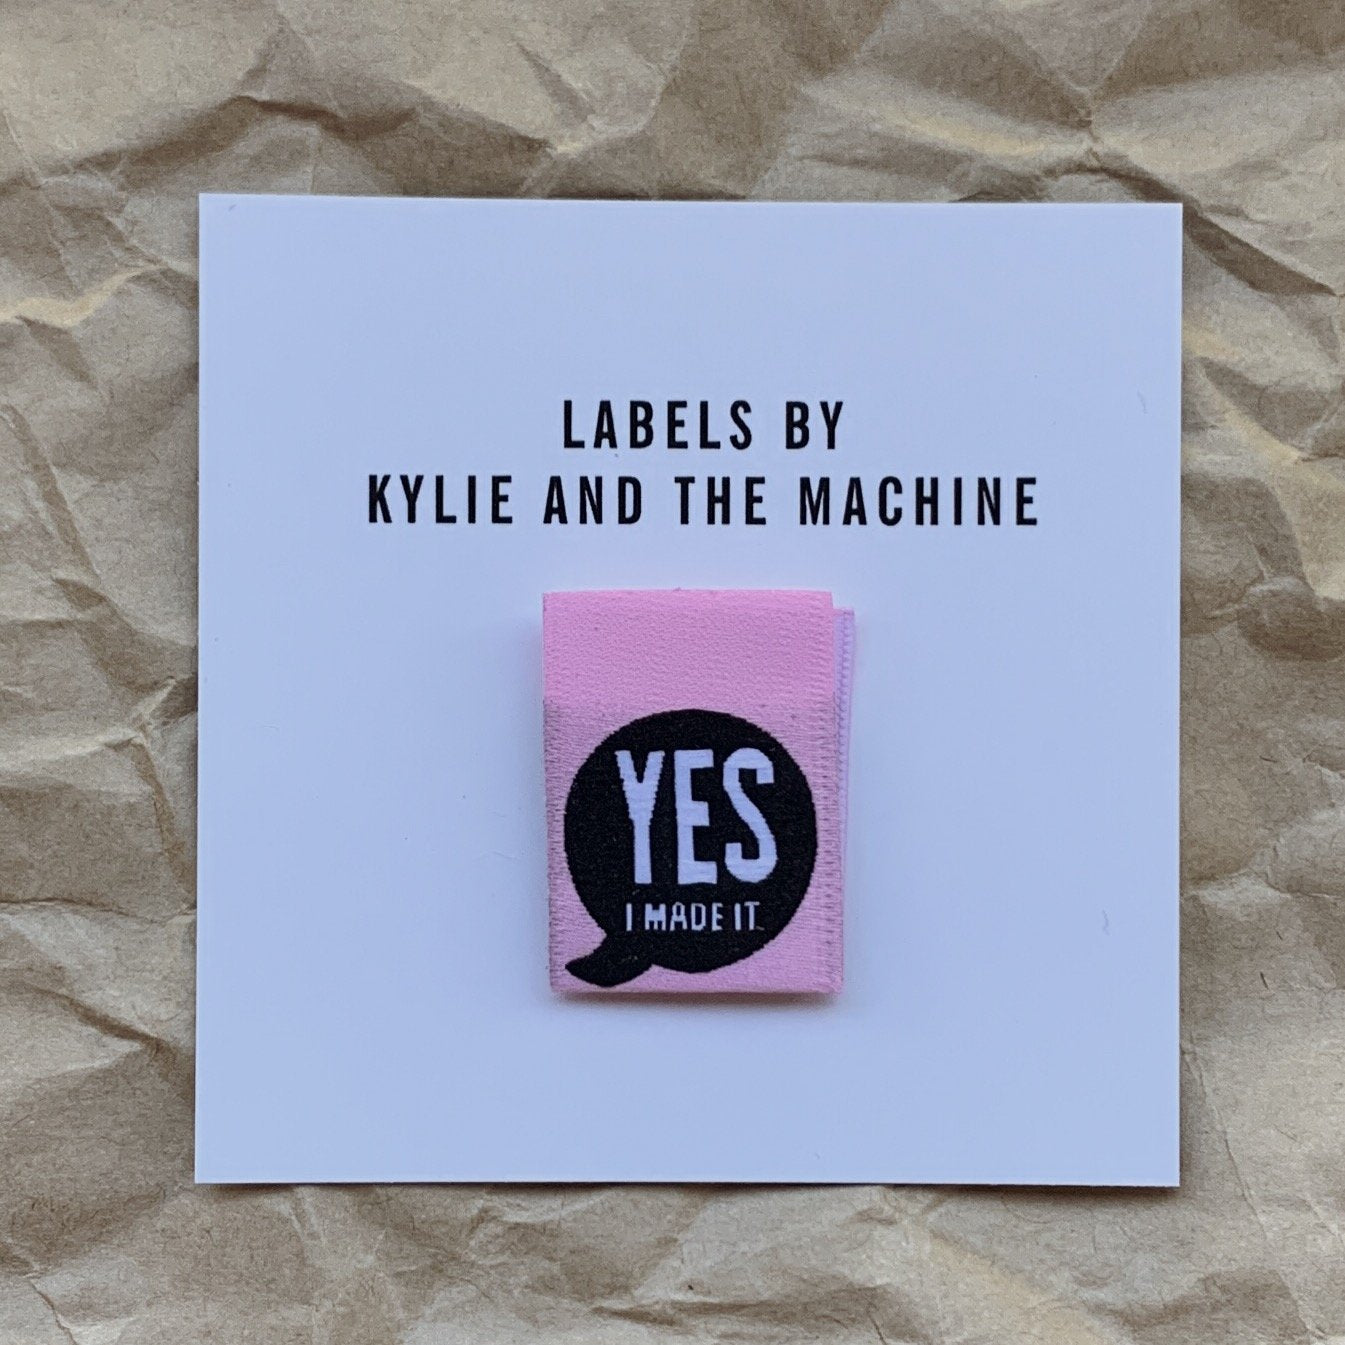 "YES I MADE IT" Woven Labels 8 Pack